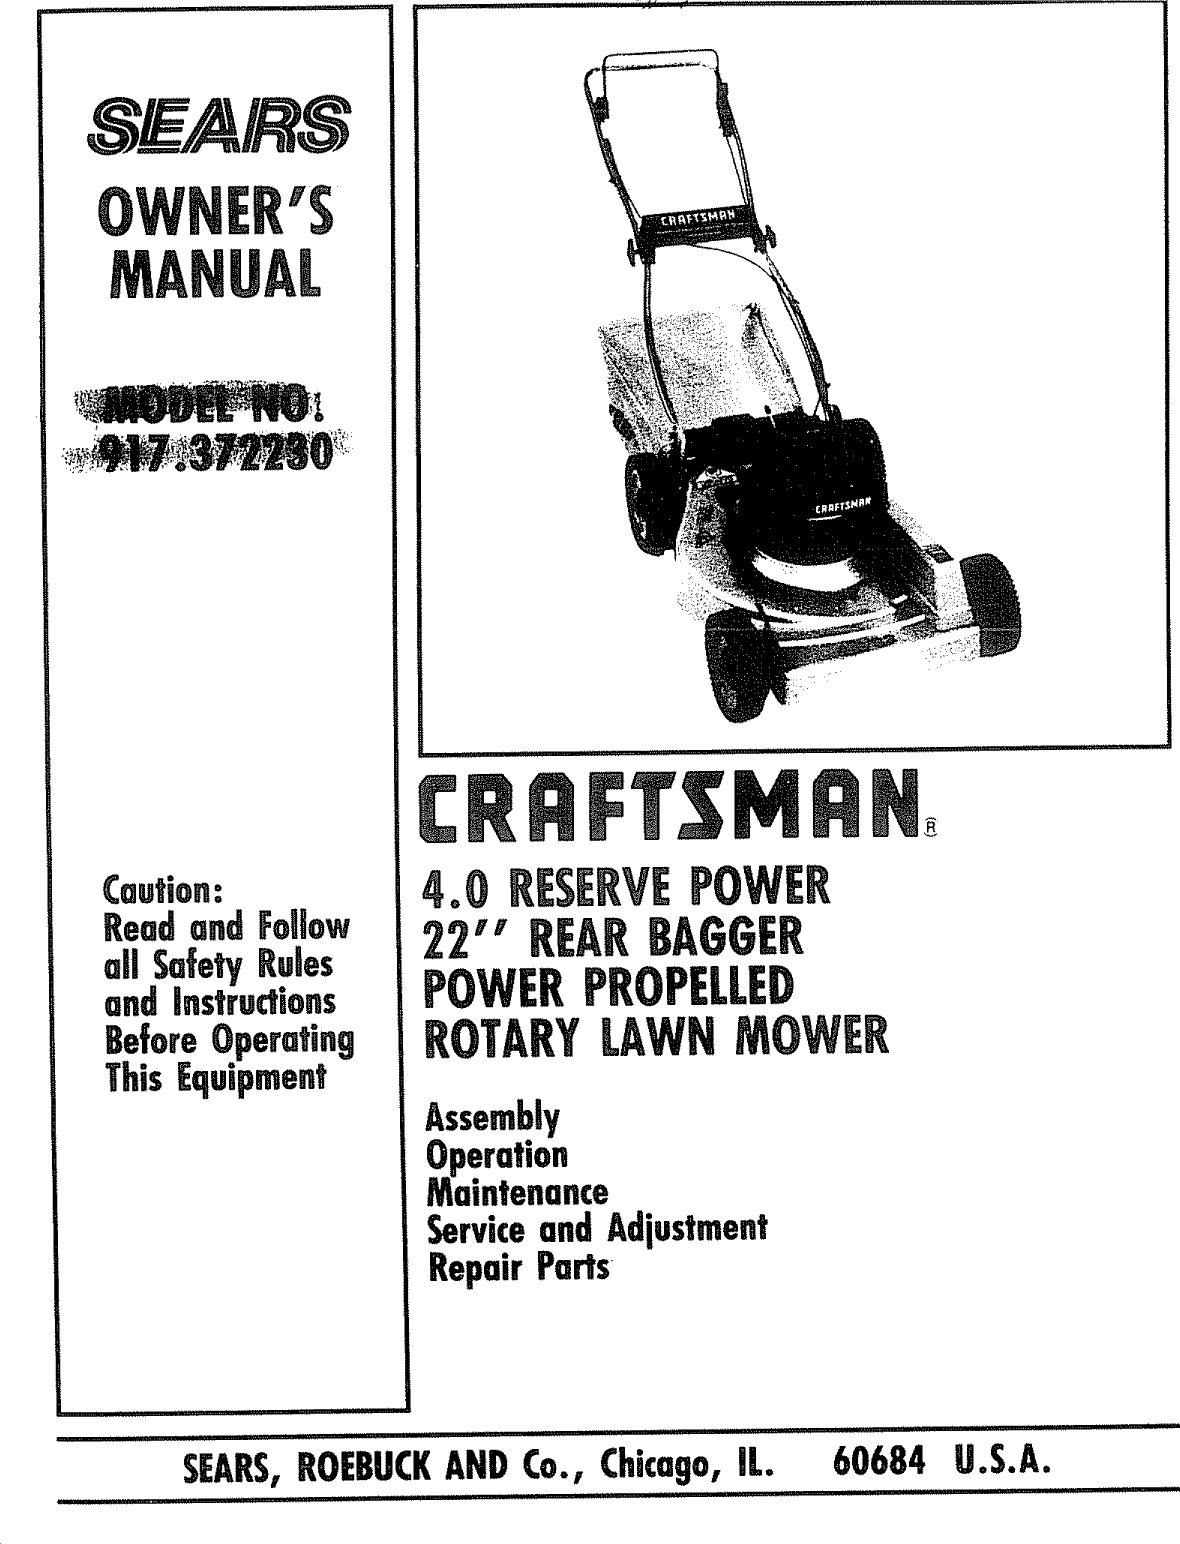 Craftsman 917372230 User Manual 22 ROTARY LAWN MOWER Manuals And Guides